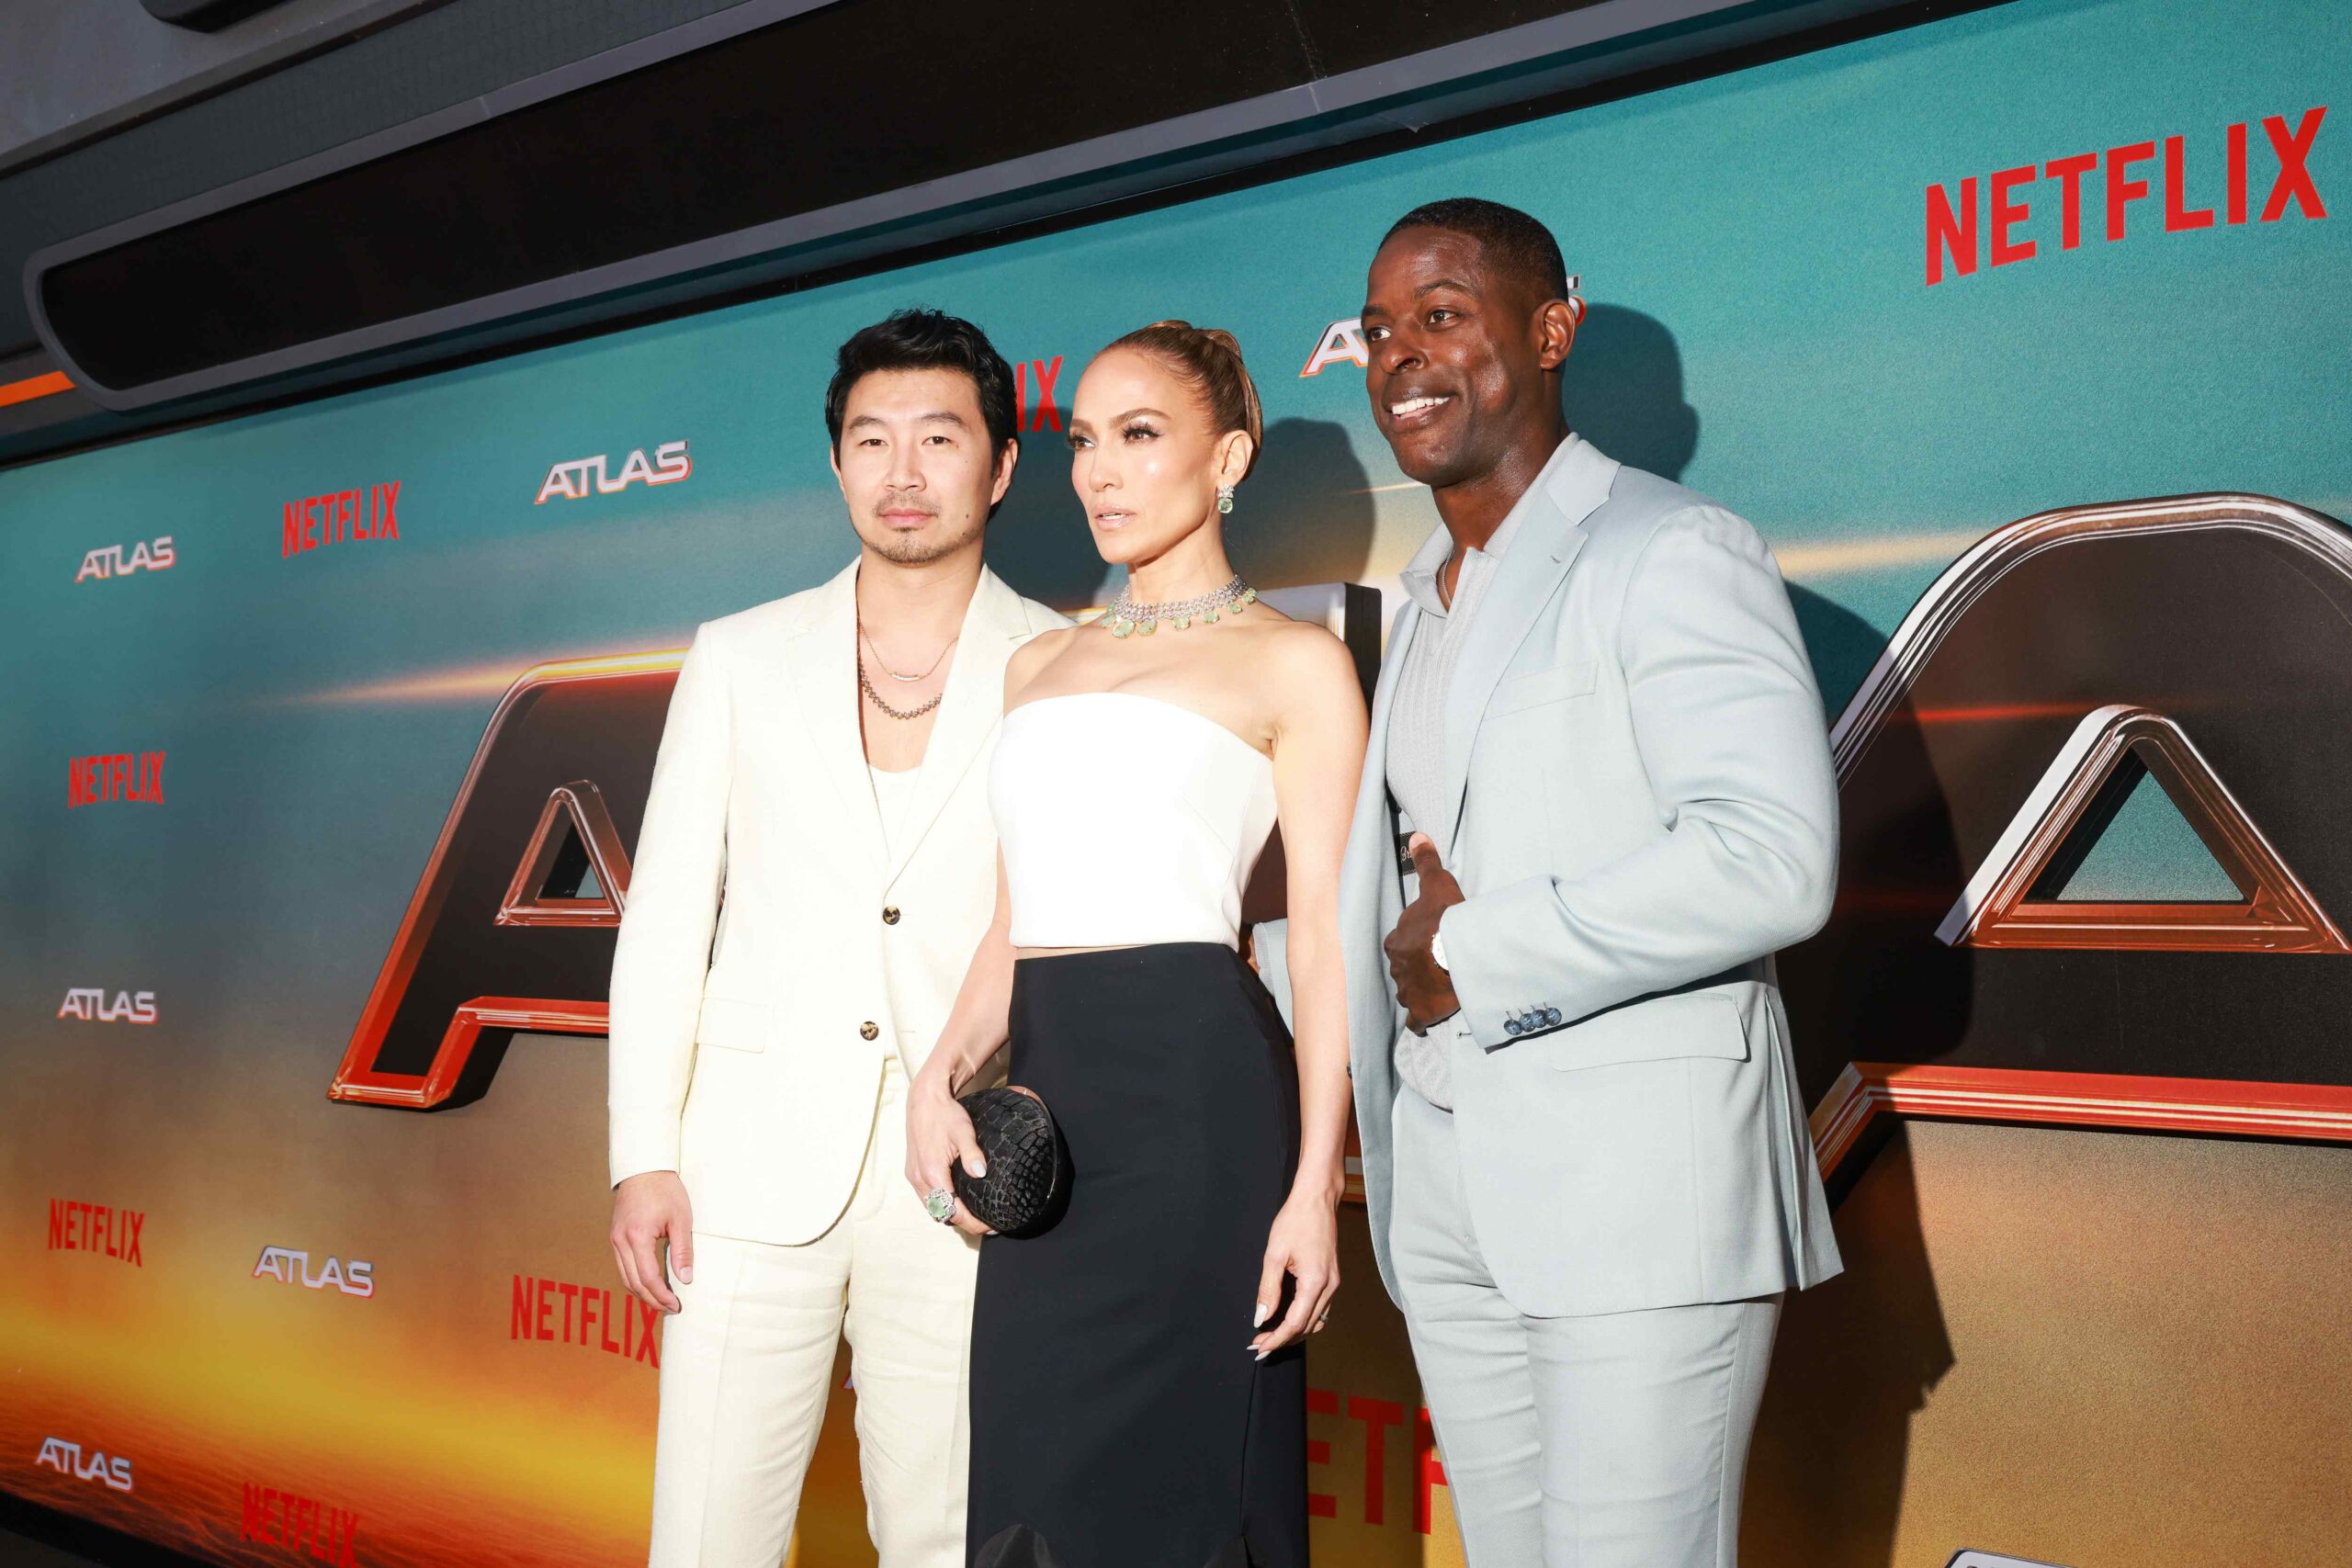 'Atlas' Stars Jennifer Lopez, Sterling K. Brown And Simu Liu On Humanity And Interconnectivity In The Film